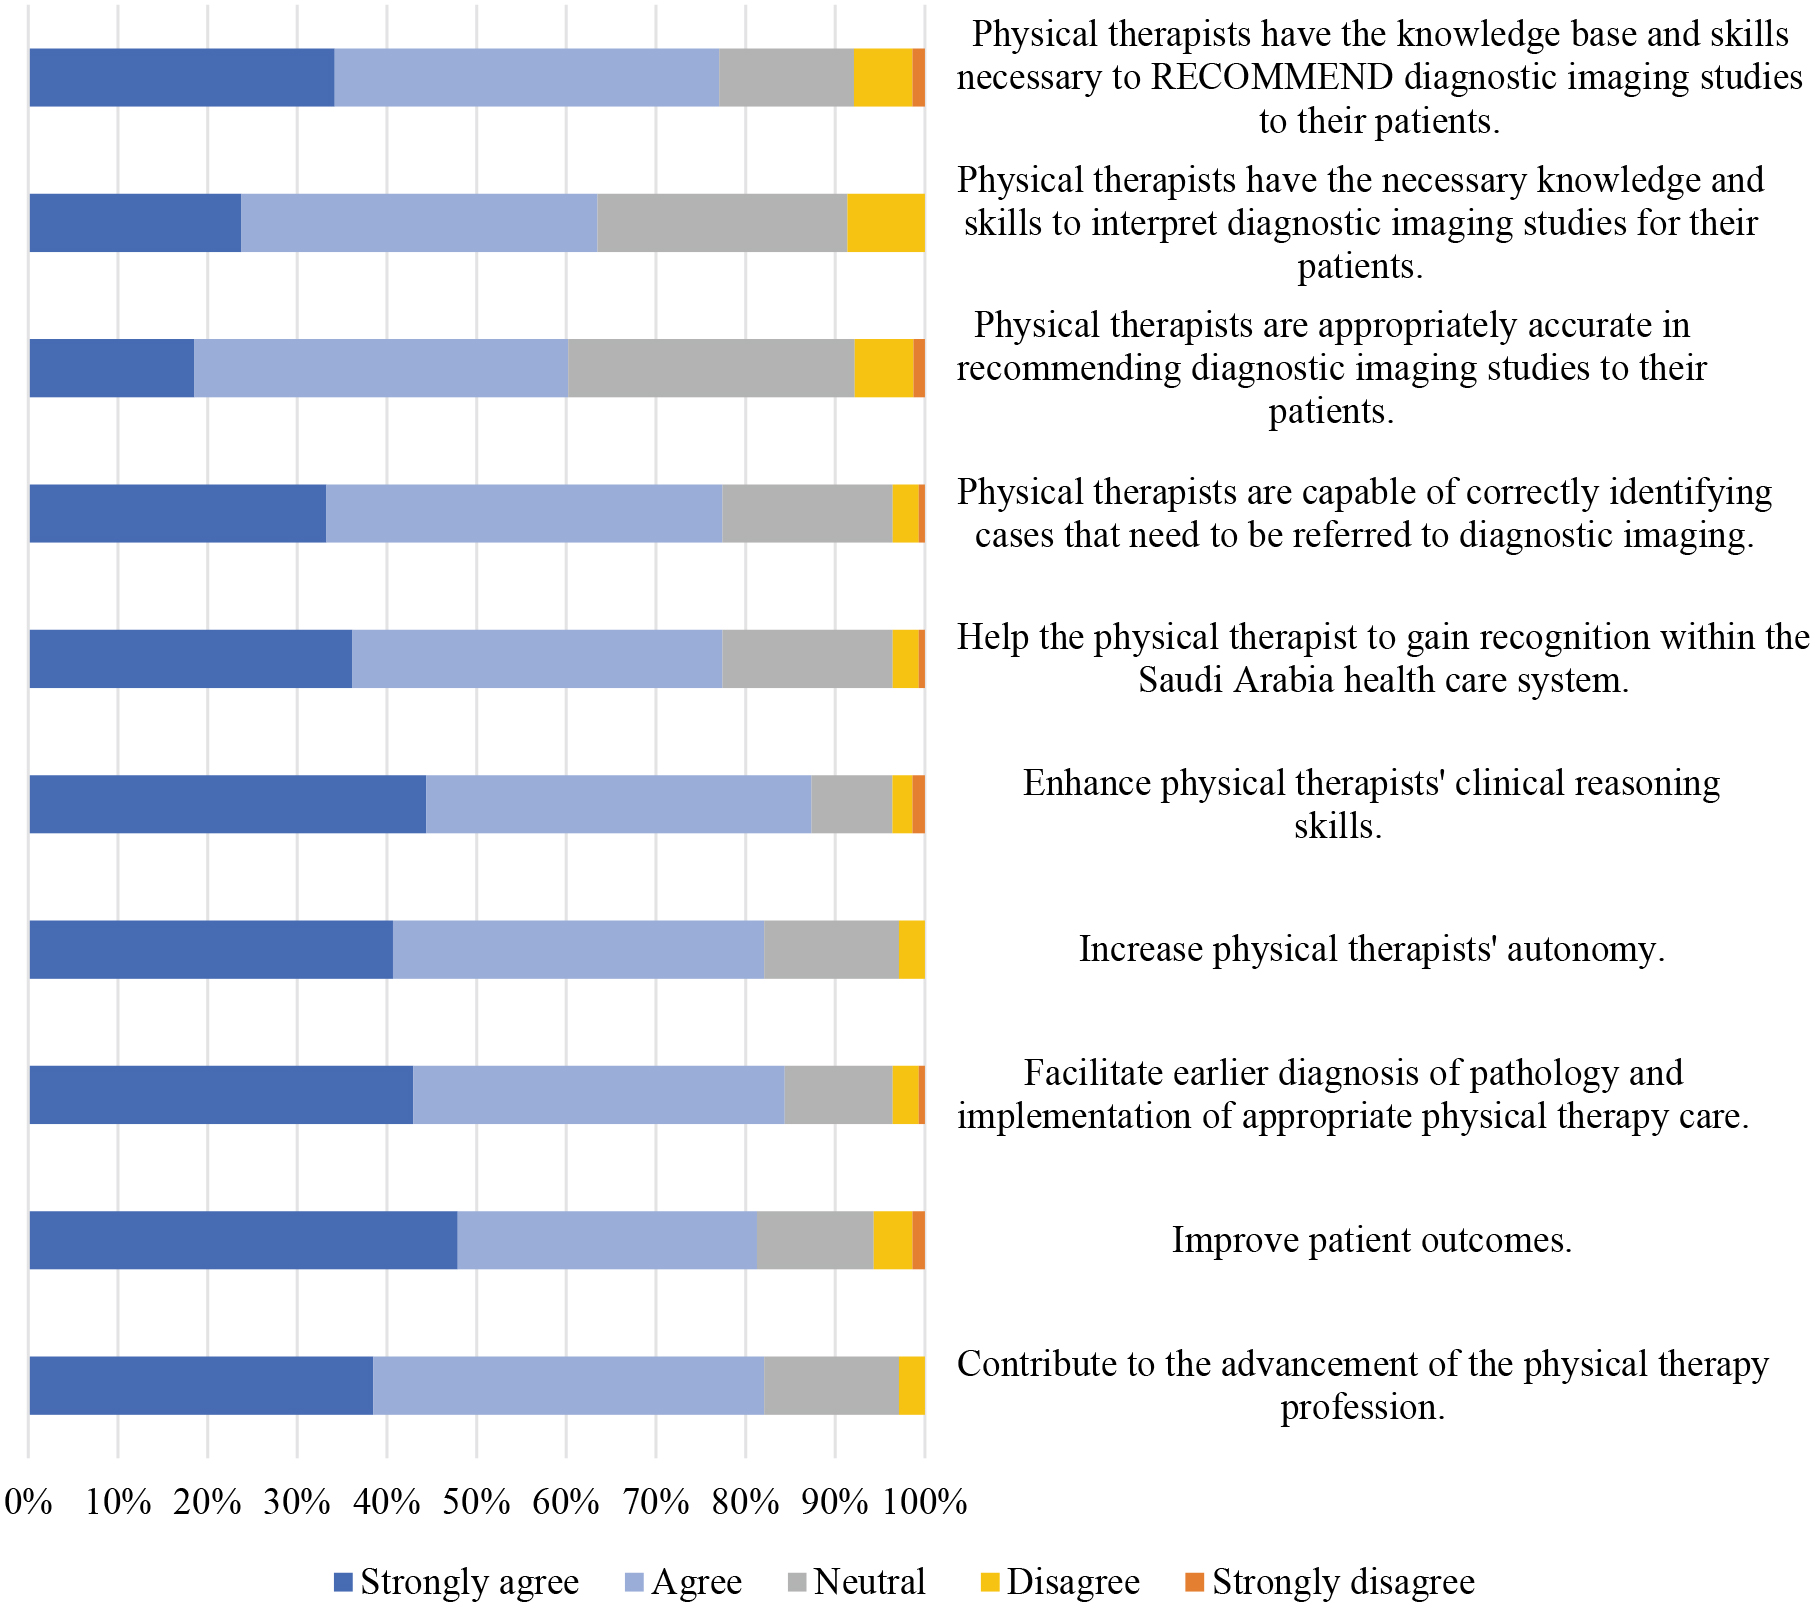 Attitudes of PTs towards their ability to recommend and order DI studies (N= 138).